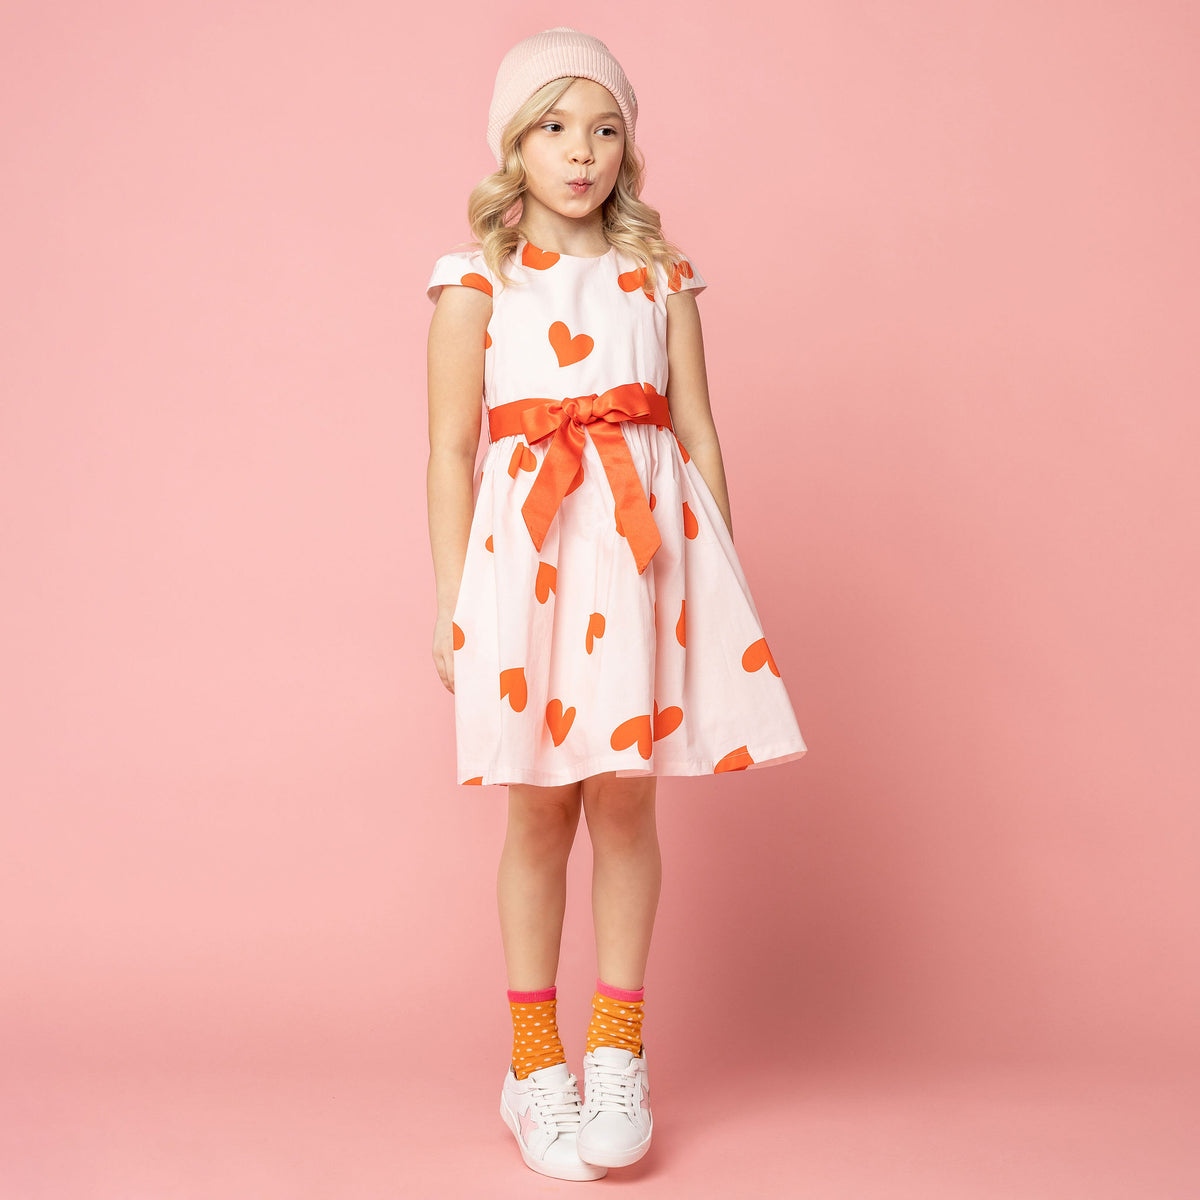 Love Heart Girls Party Dress, Pink & Red | Holly Hastie London